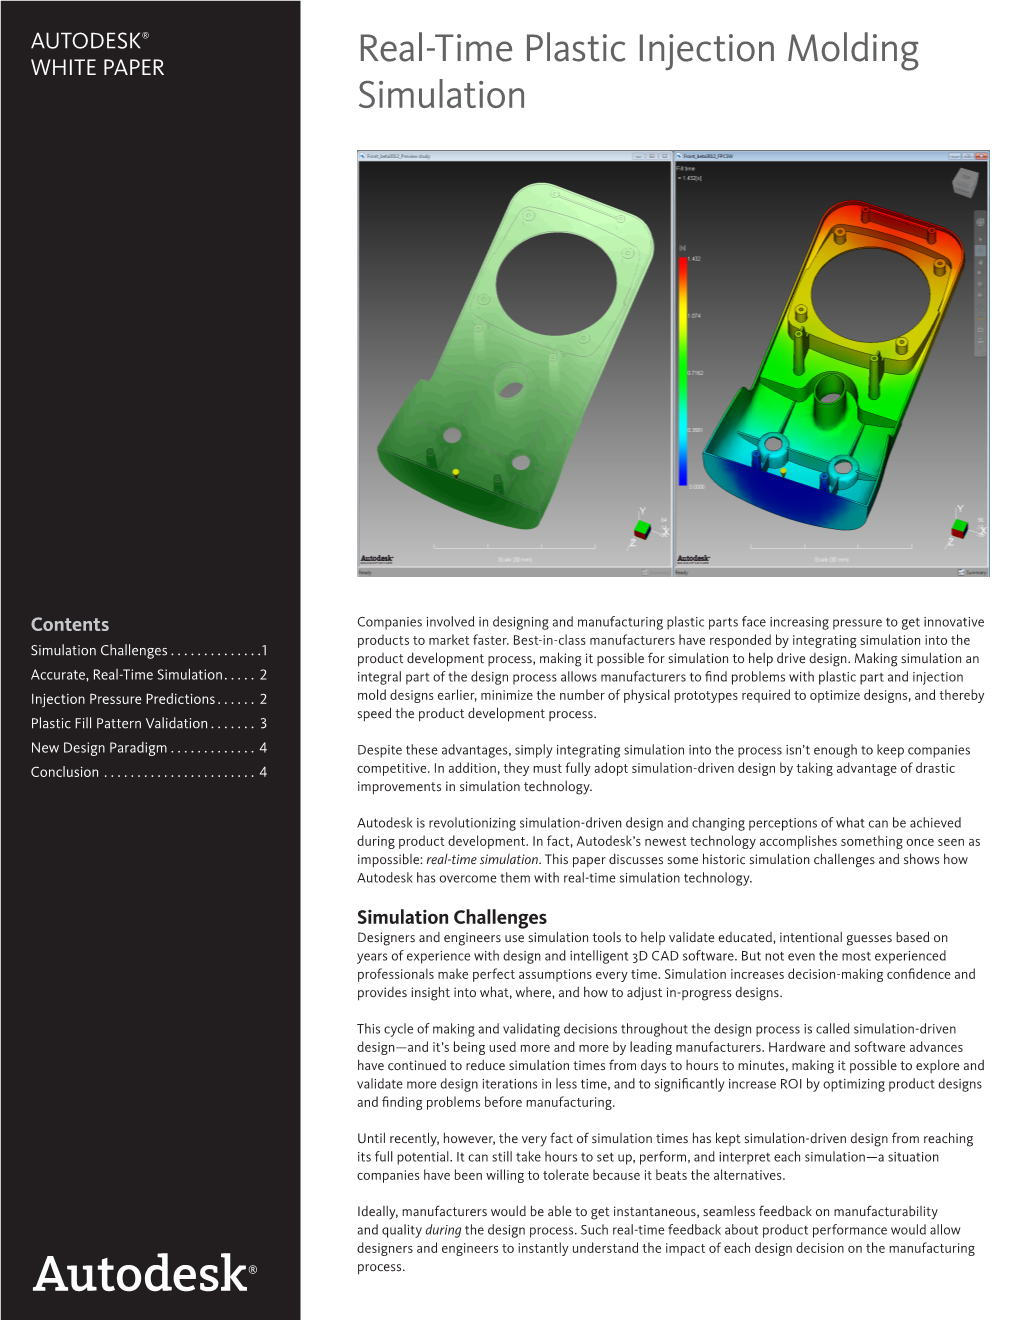 Real-Time Plastic Injection Molding Simulation White Paper